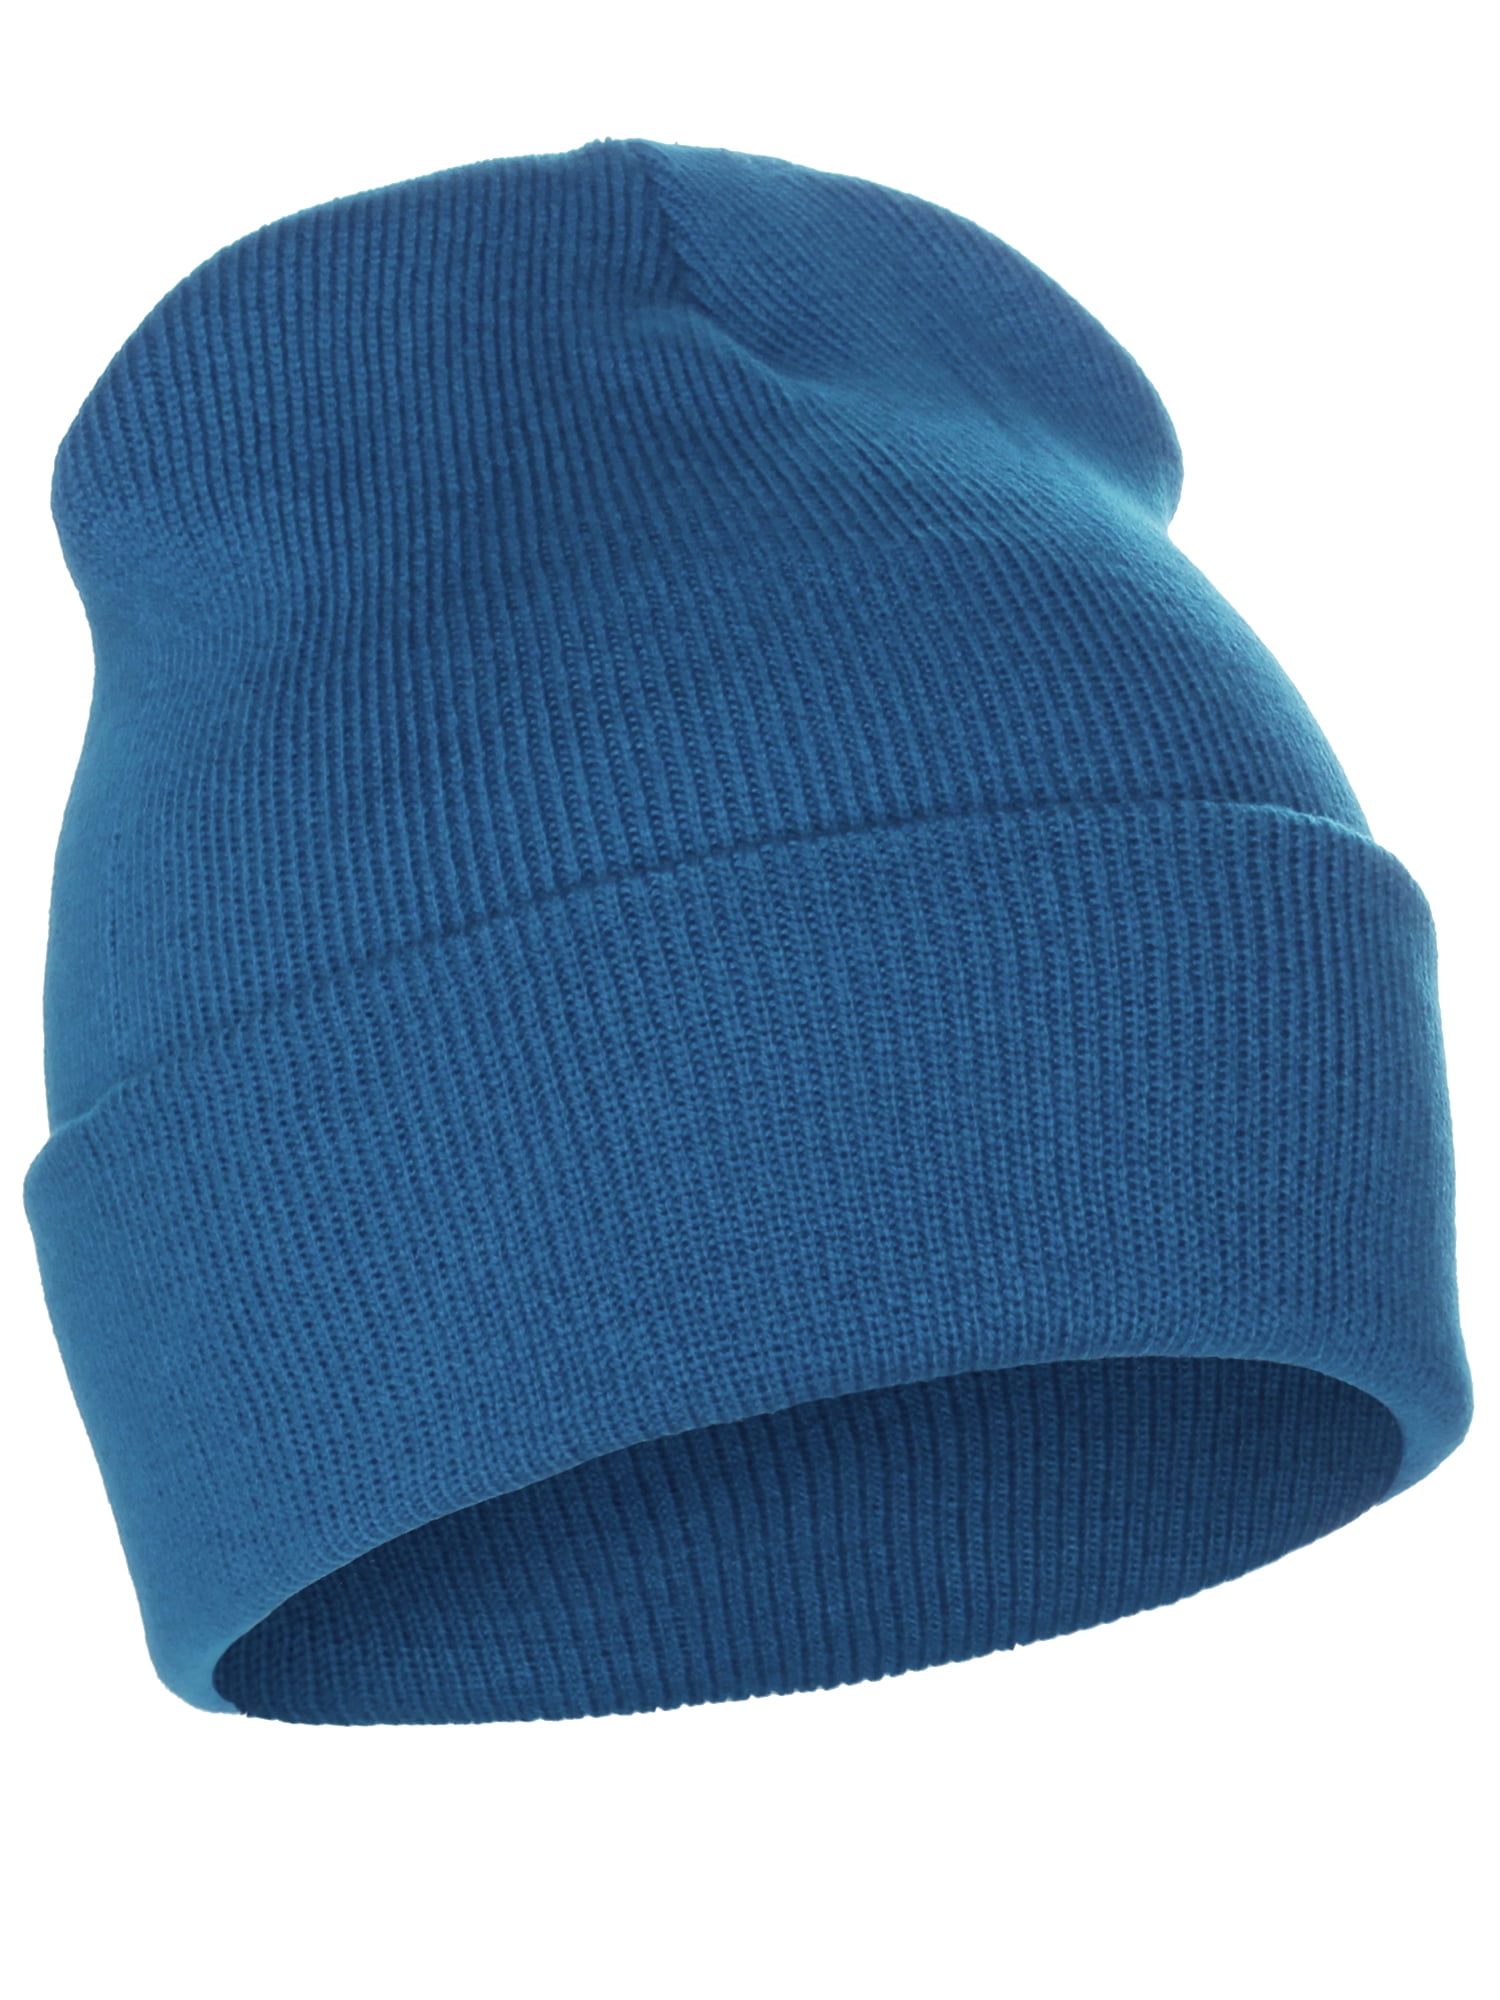 Beanie Cuffed Knit Hat Classic Cap, Turquoise Skully Winter Plain